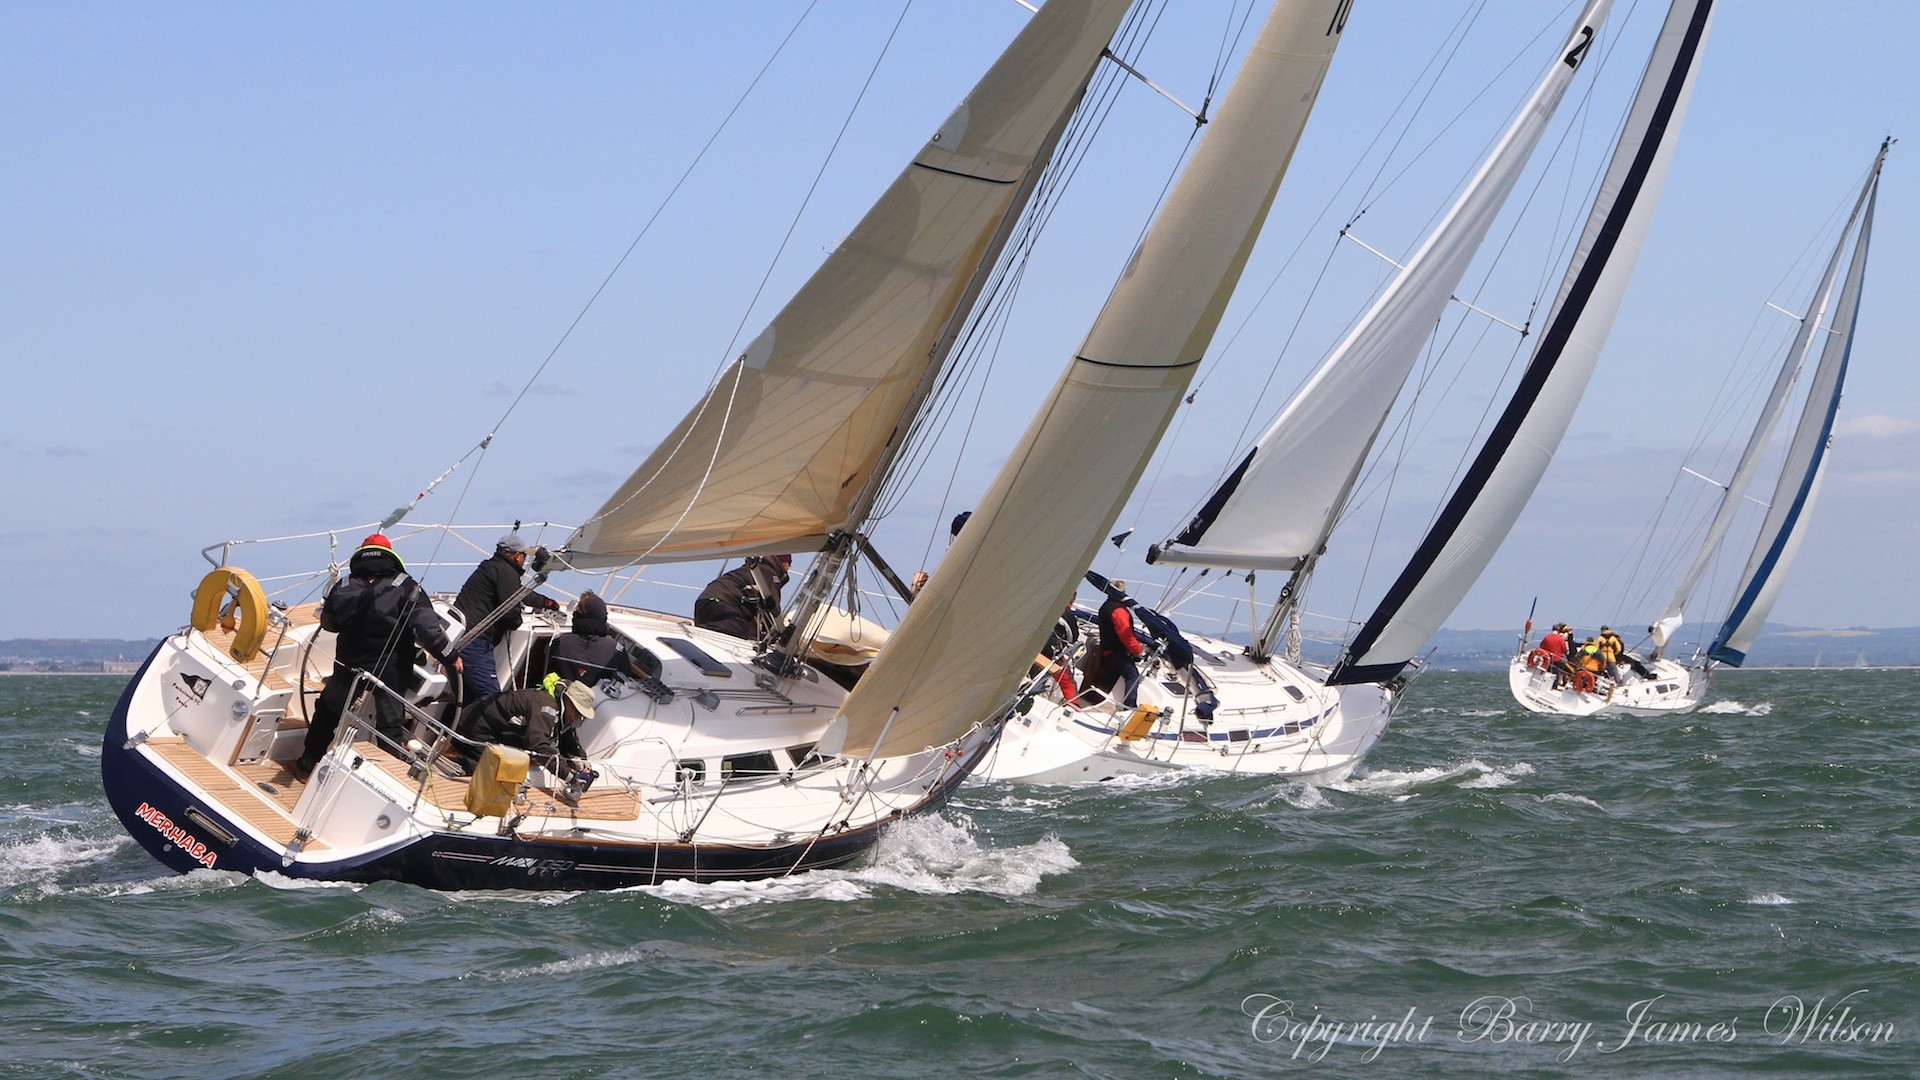 1920x1080 Sailing Wallpaper Racing Images & Pictures - Becuo